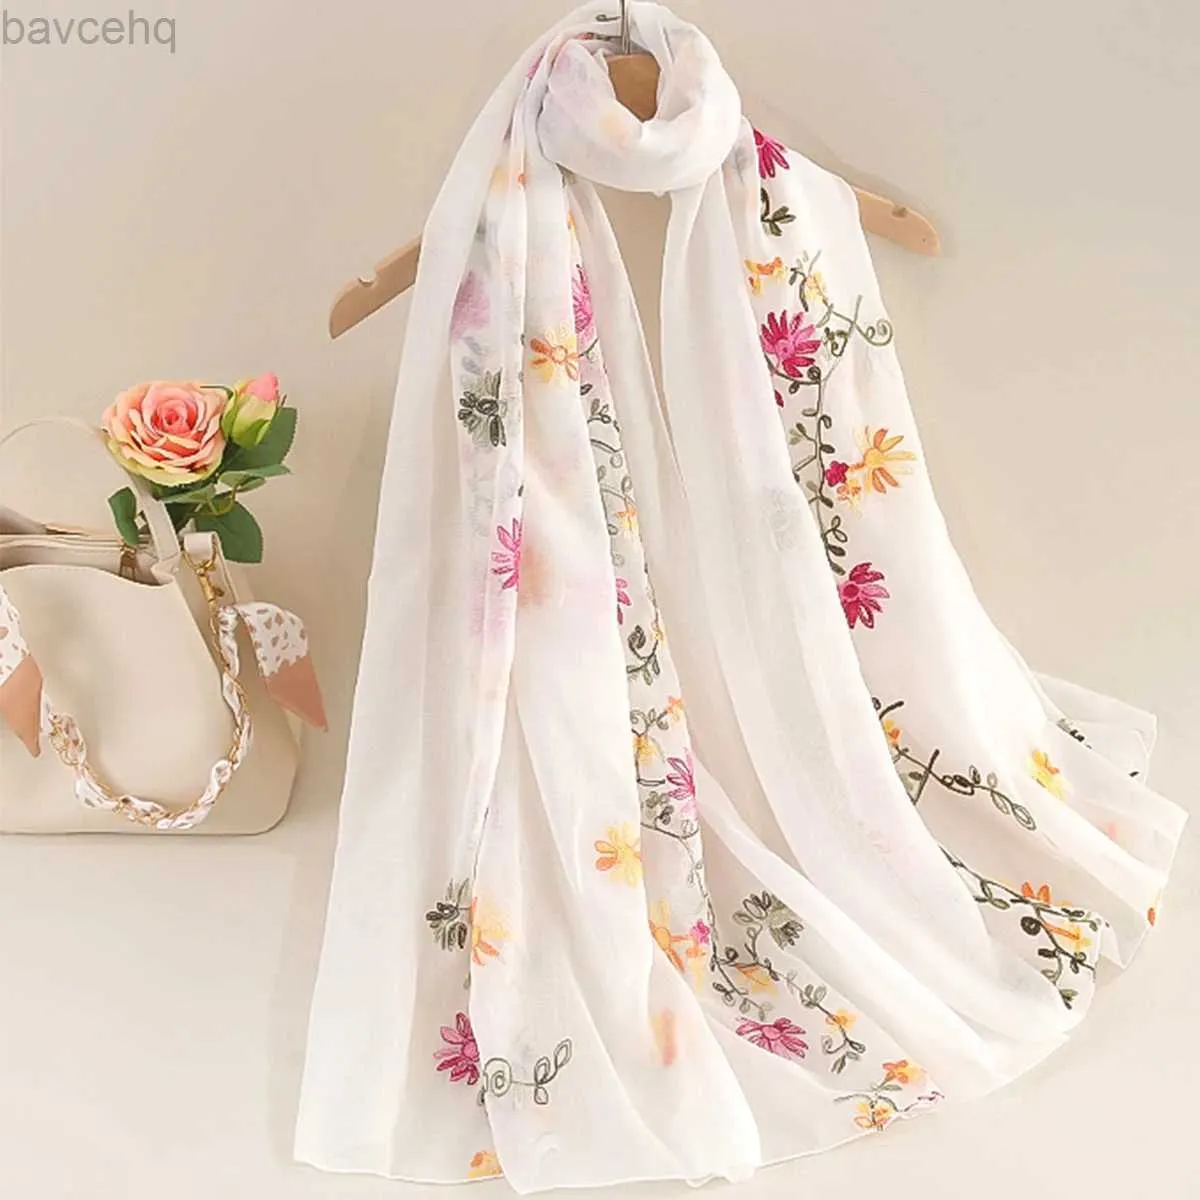 Shawls New spring and summer female literary national wind shawls cotton and linen long sunscreen travel scarf dual-purpose embroidery d240426